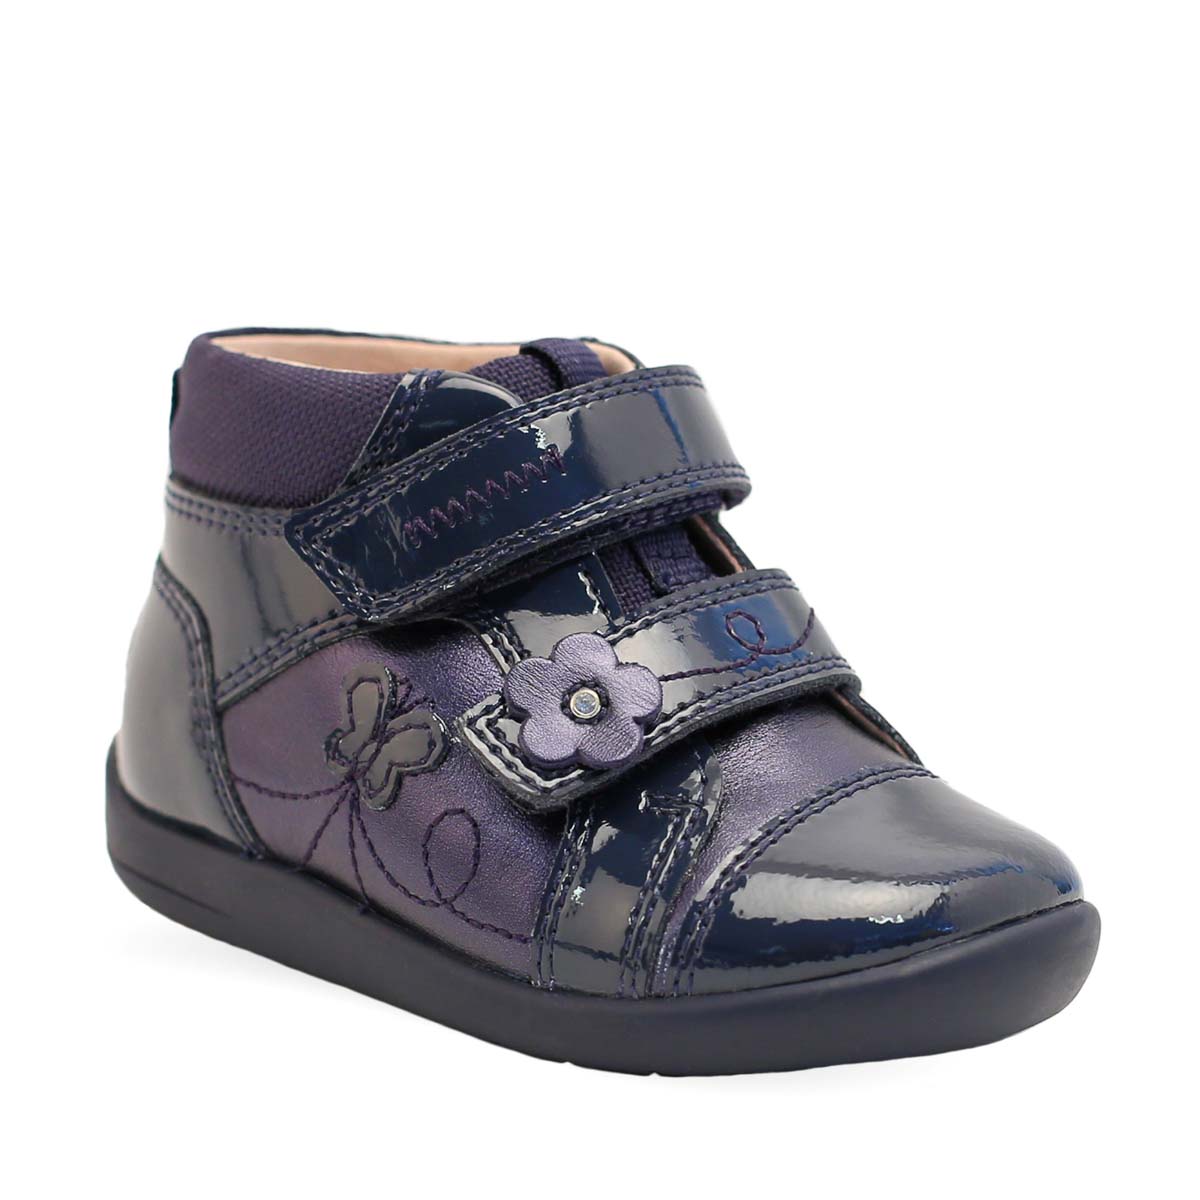 Start Rite - Daydream 2V In Navy Patent 0792-96F In Size 6 In Plain Navy Patent Infant Girls Boots  In Navy Patent For kids